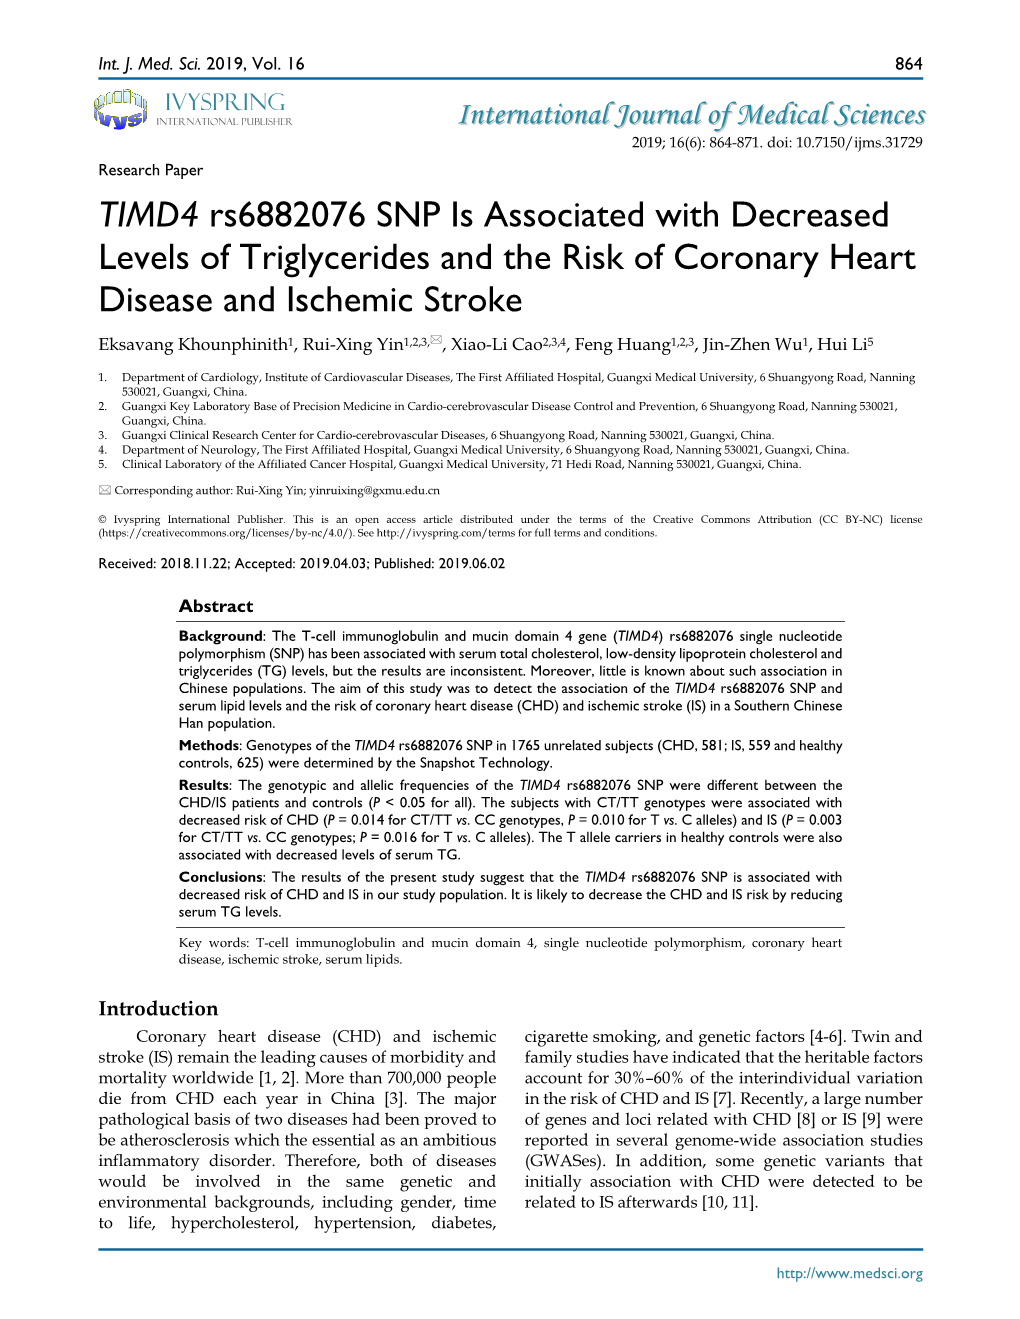 TIMD4 Rs6882076 SNP Is Associated with Decreased Levels Of